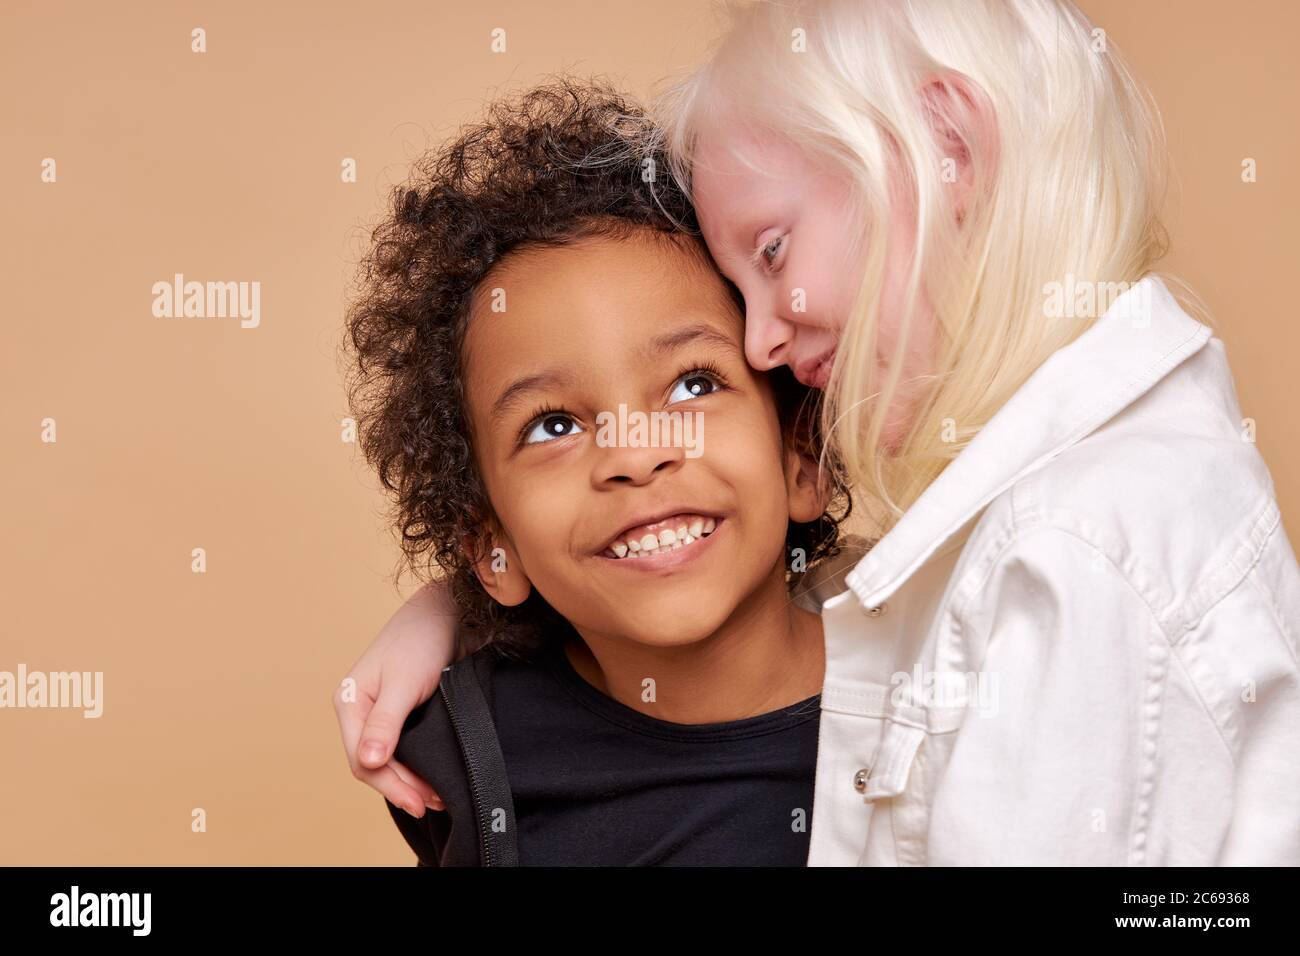 close friendship between two children of different nationalities, beautiful caucasian albino girl and african boy with curly hair, they are hugging Stock Photo